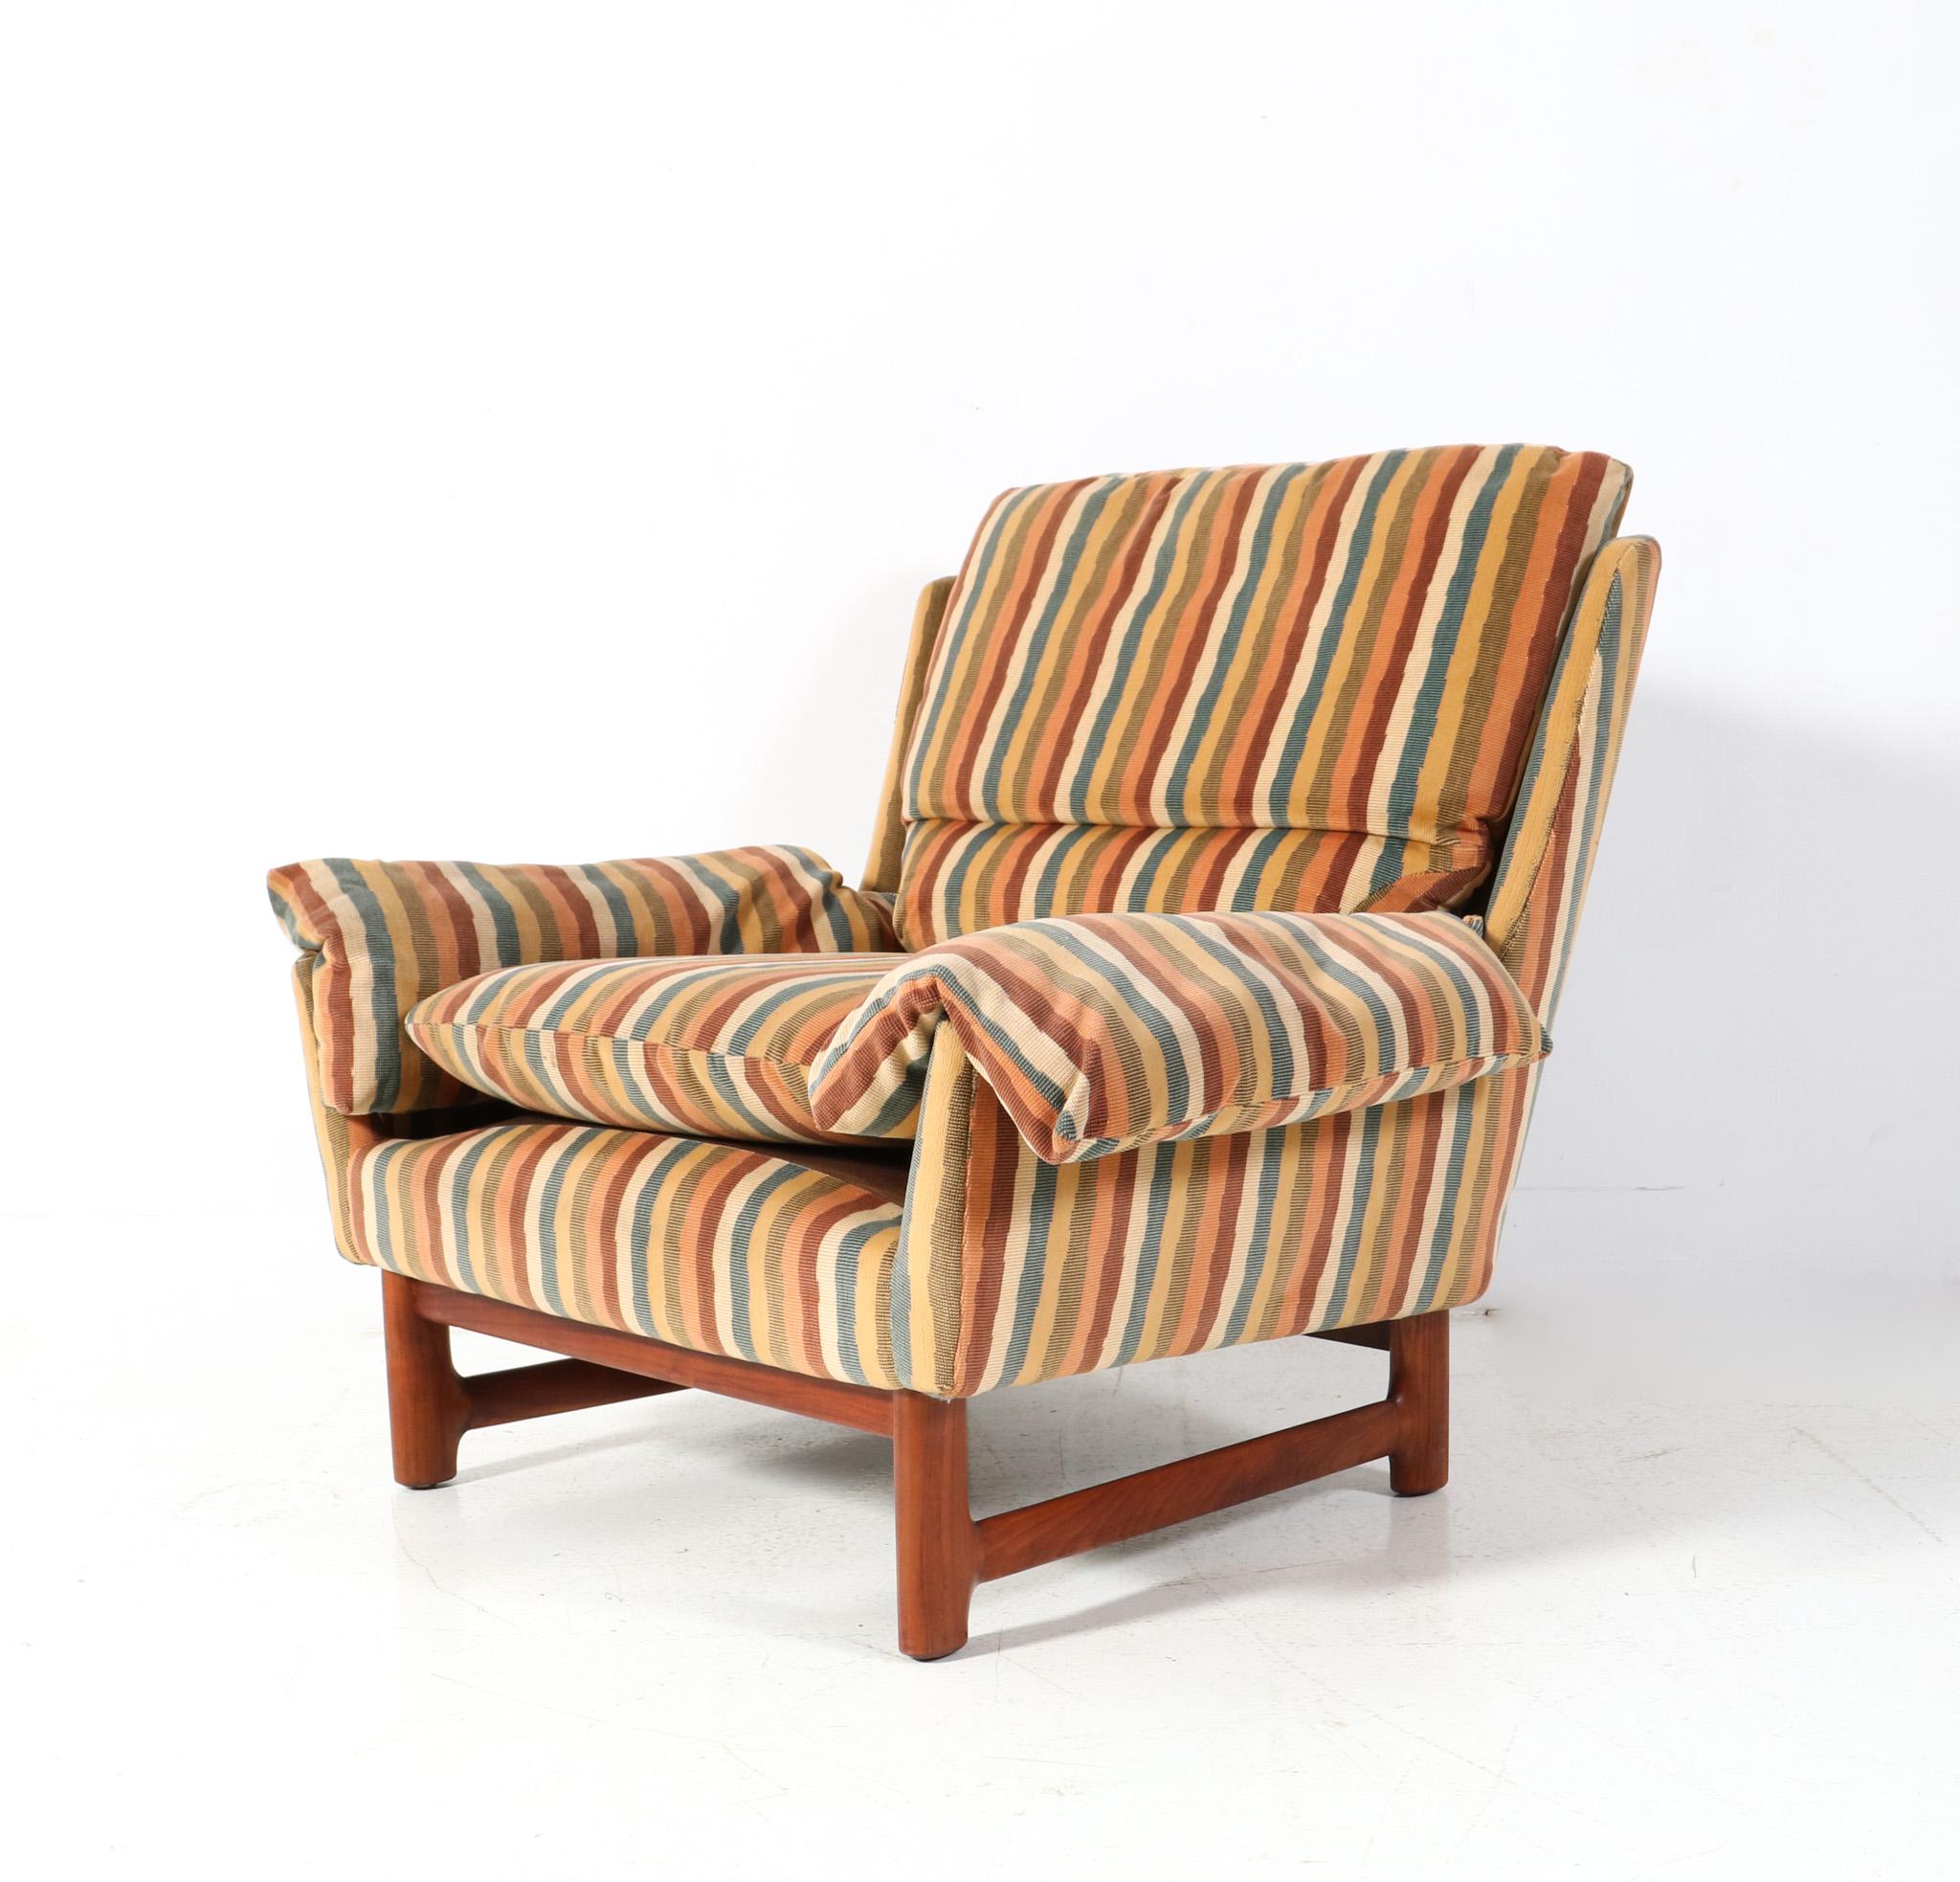 Stunning and elegant Mid-Century Modern club chair.
Striking Danish design from the 1970s.
Original solid teak frame which has been re-upholstered with a high quality multi-colored striped fabric by the former owner.
This wonderful Mid-Century